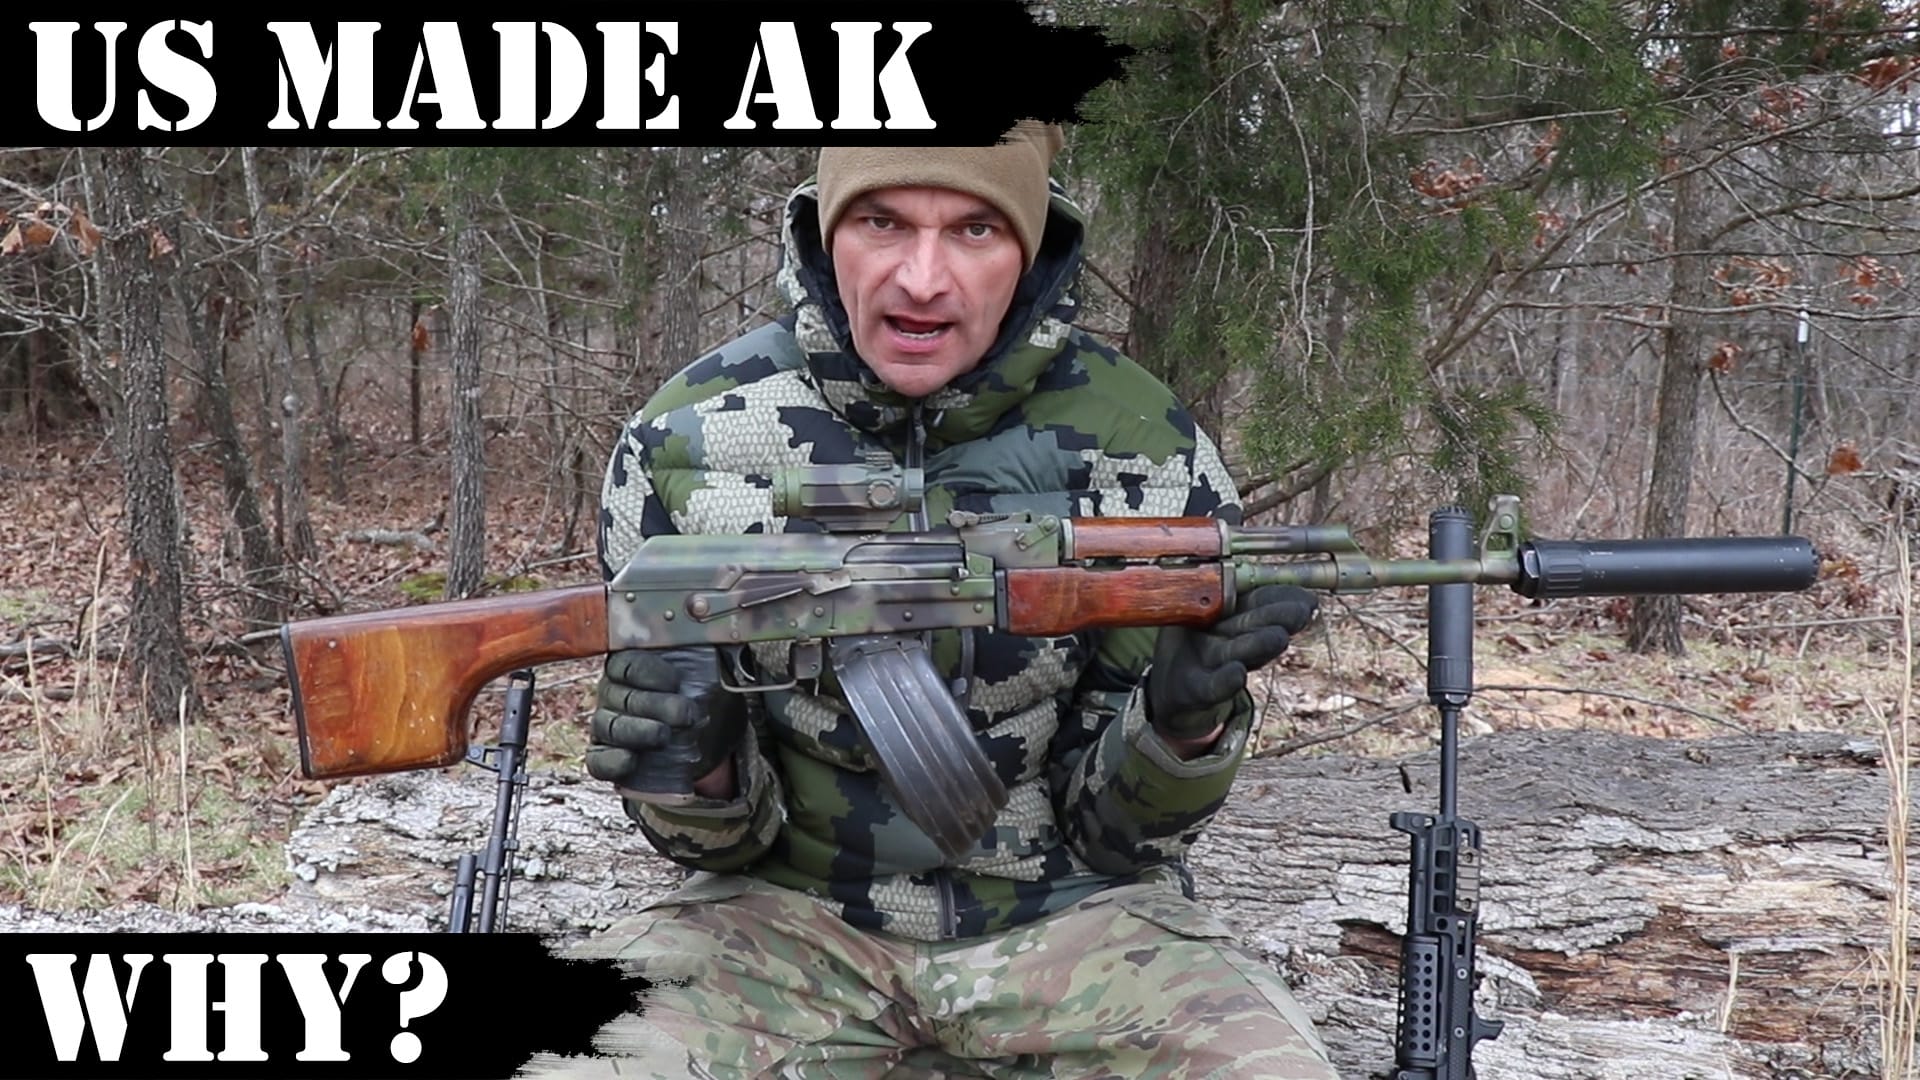 US made AK – why?